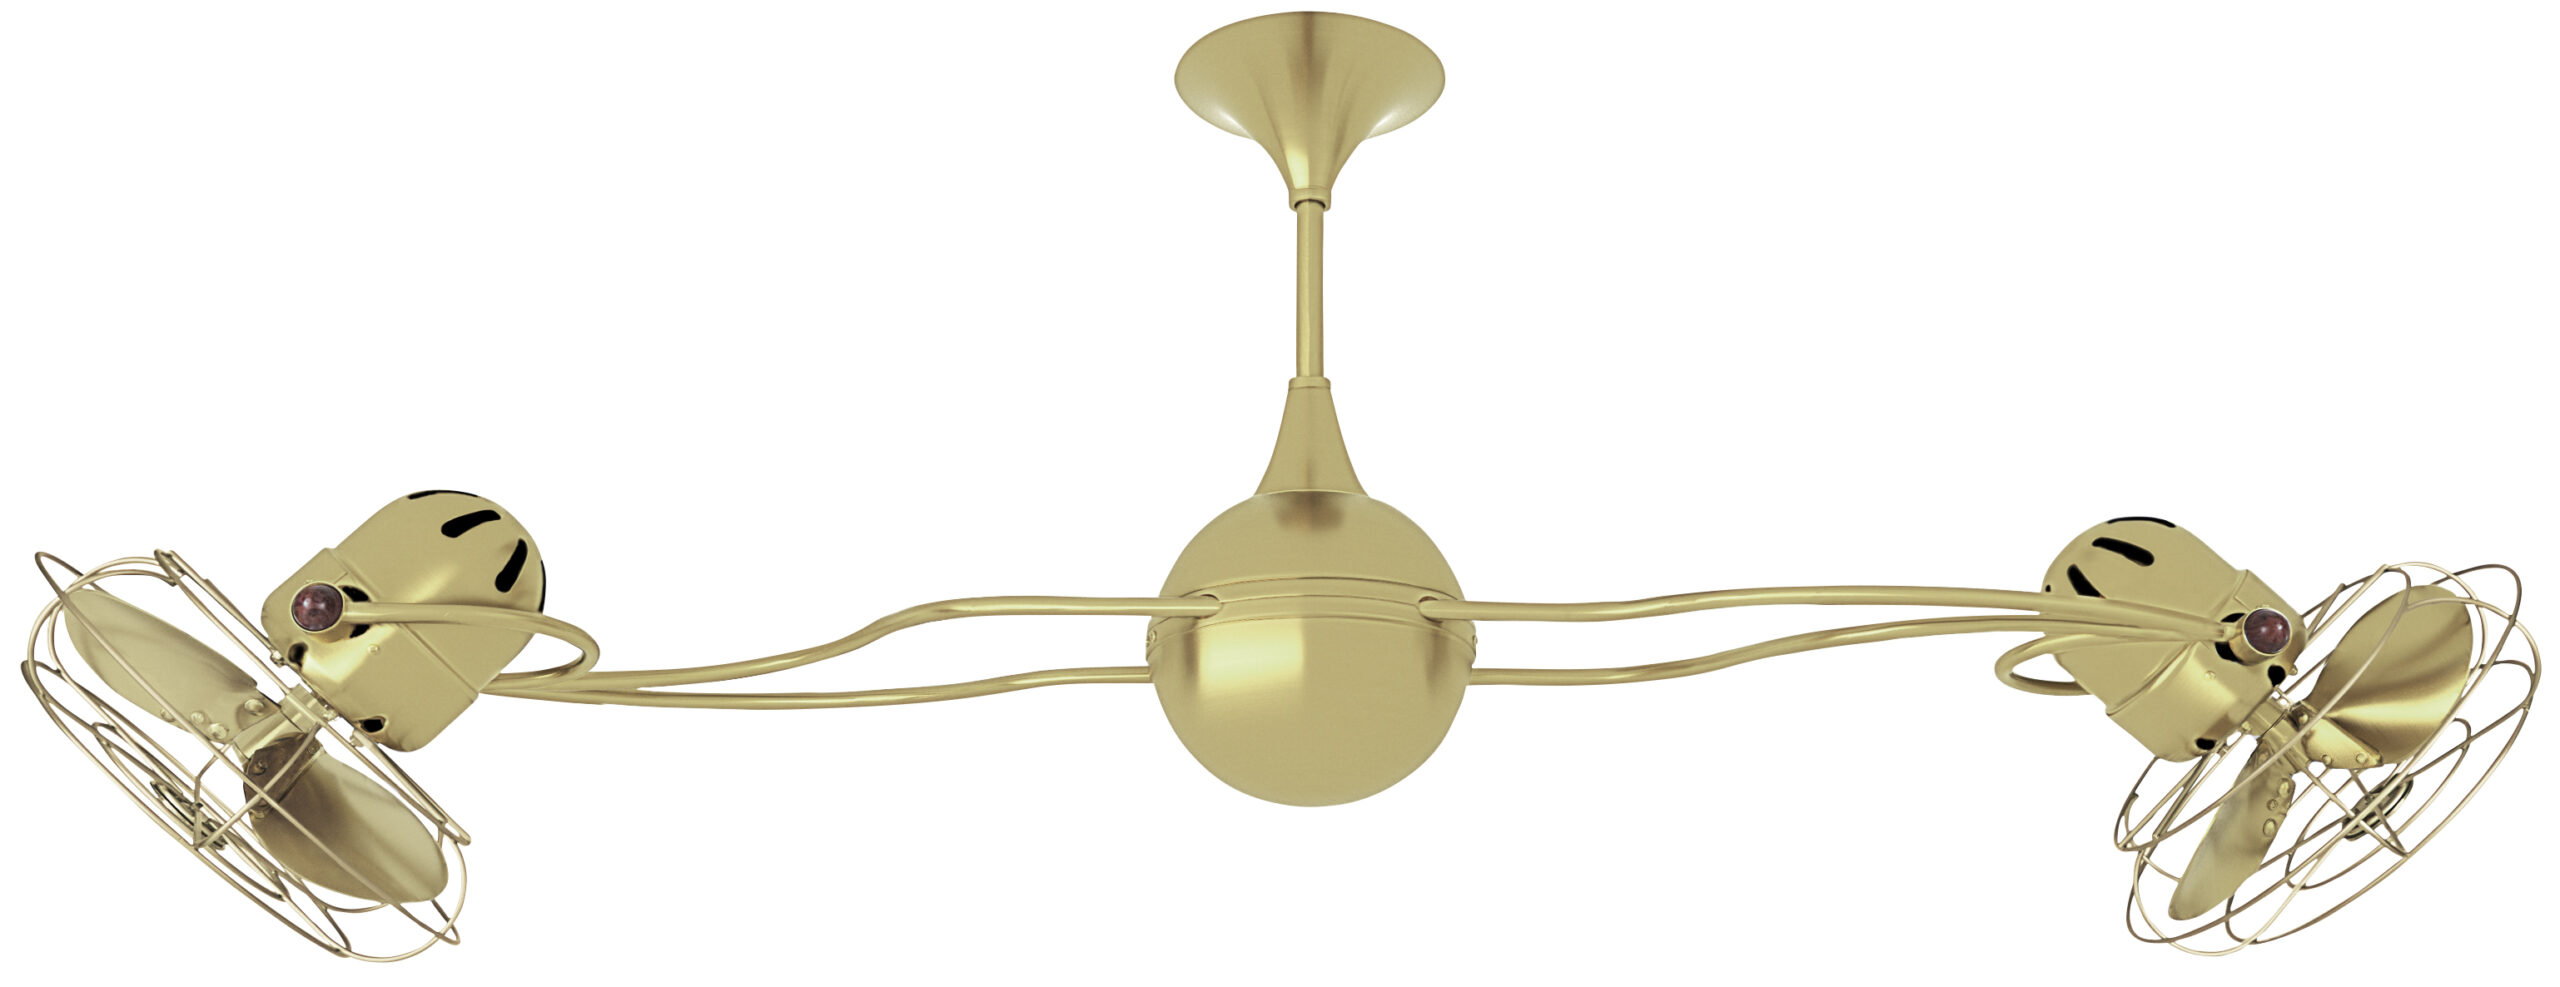 Italo Ventania rotational dual head ceiling fan in Brushed Brass finish with Metal blades and decorative cage made by Matthews Fan Company.